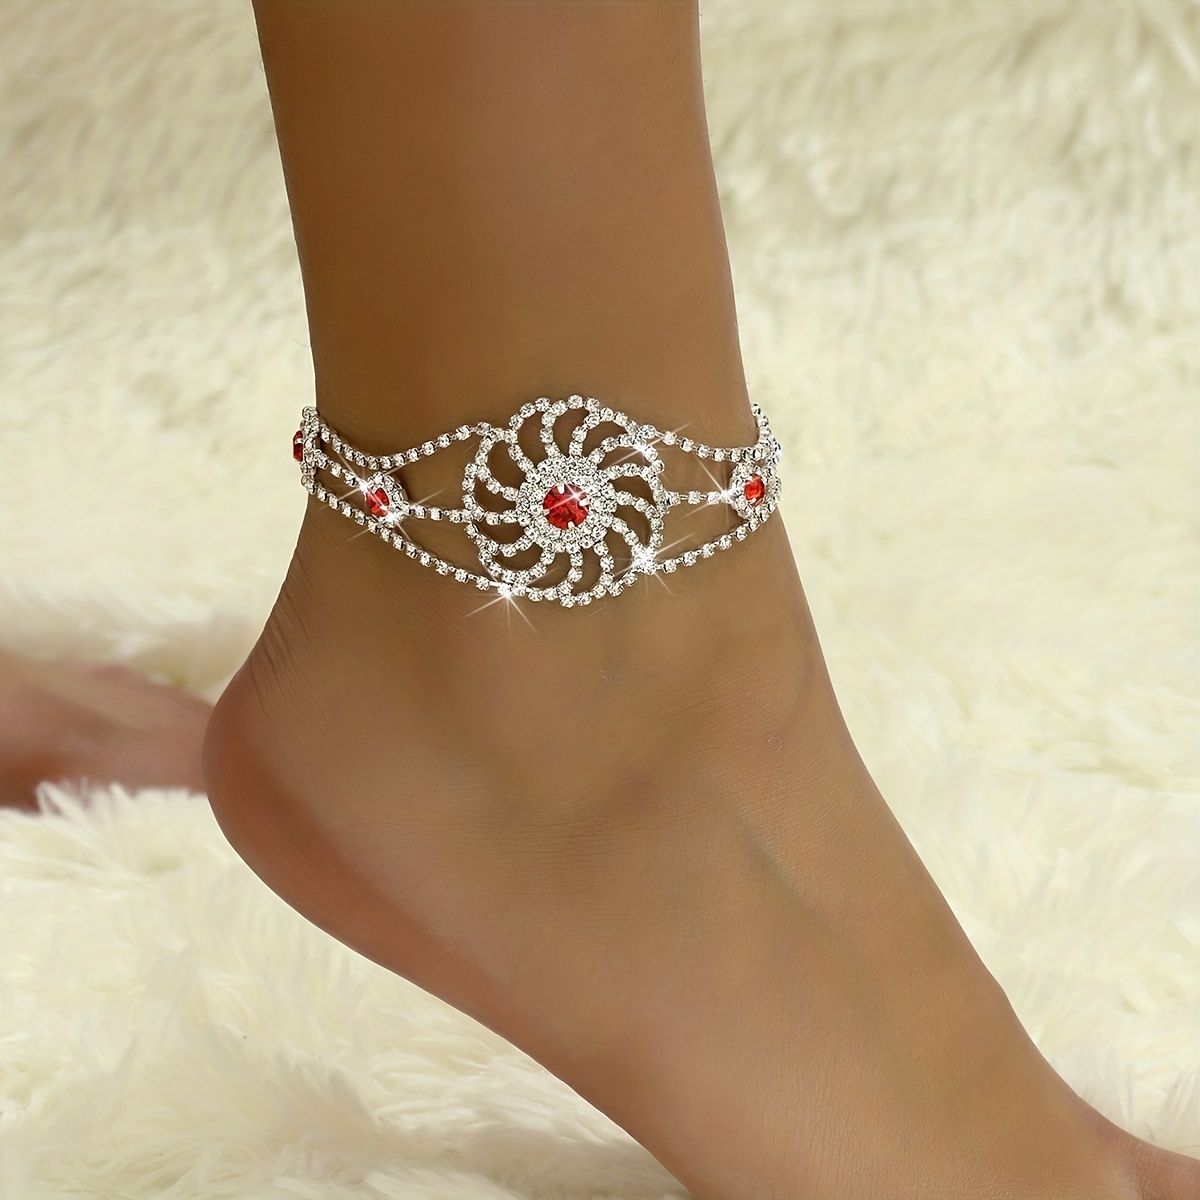 

Bling Bling Hollow Out Sunflower Shape Claw Chain Anklet Inlaid Shiny Rhinestone For Women Girls Ankle Bracelet